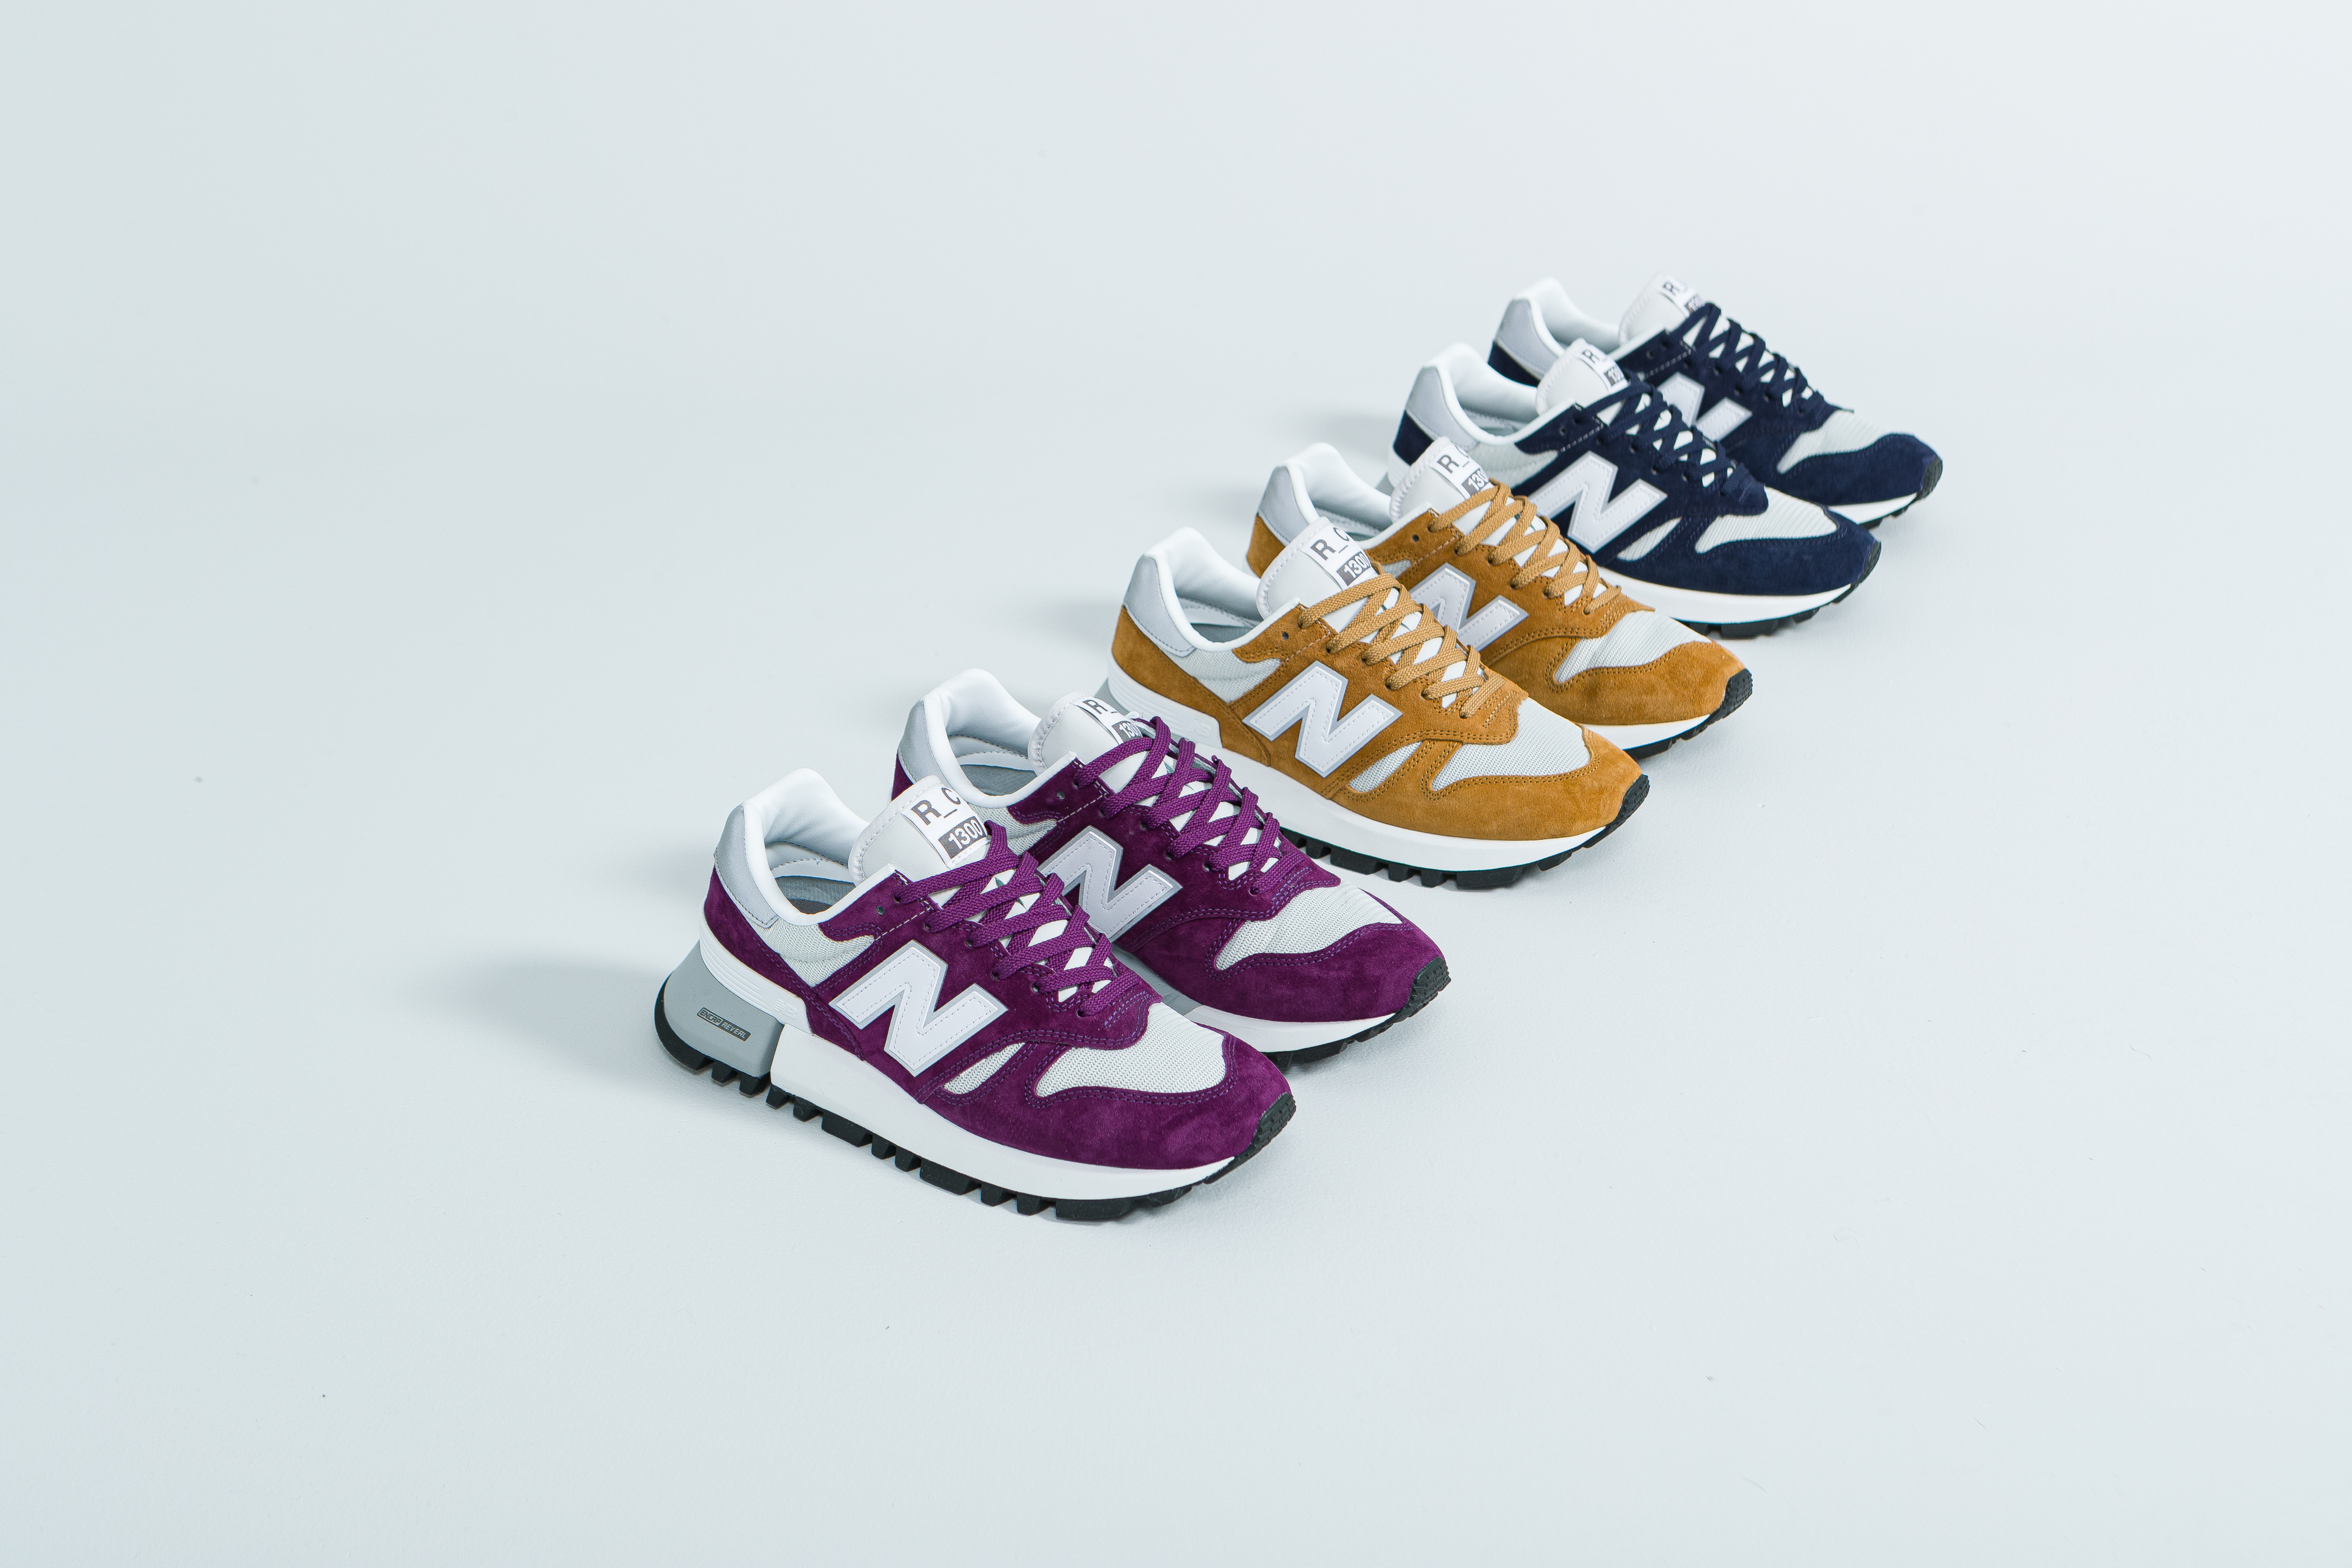 New Balance RC_1300 - MS1300TC, MS1300TD, and MS1300TE | Up There